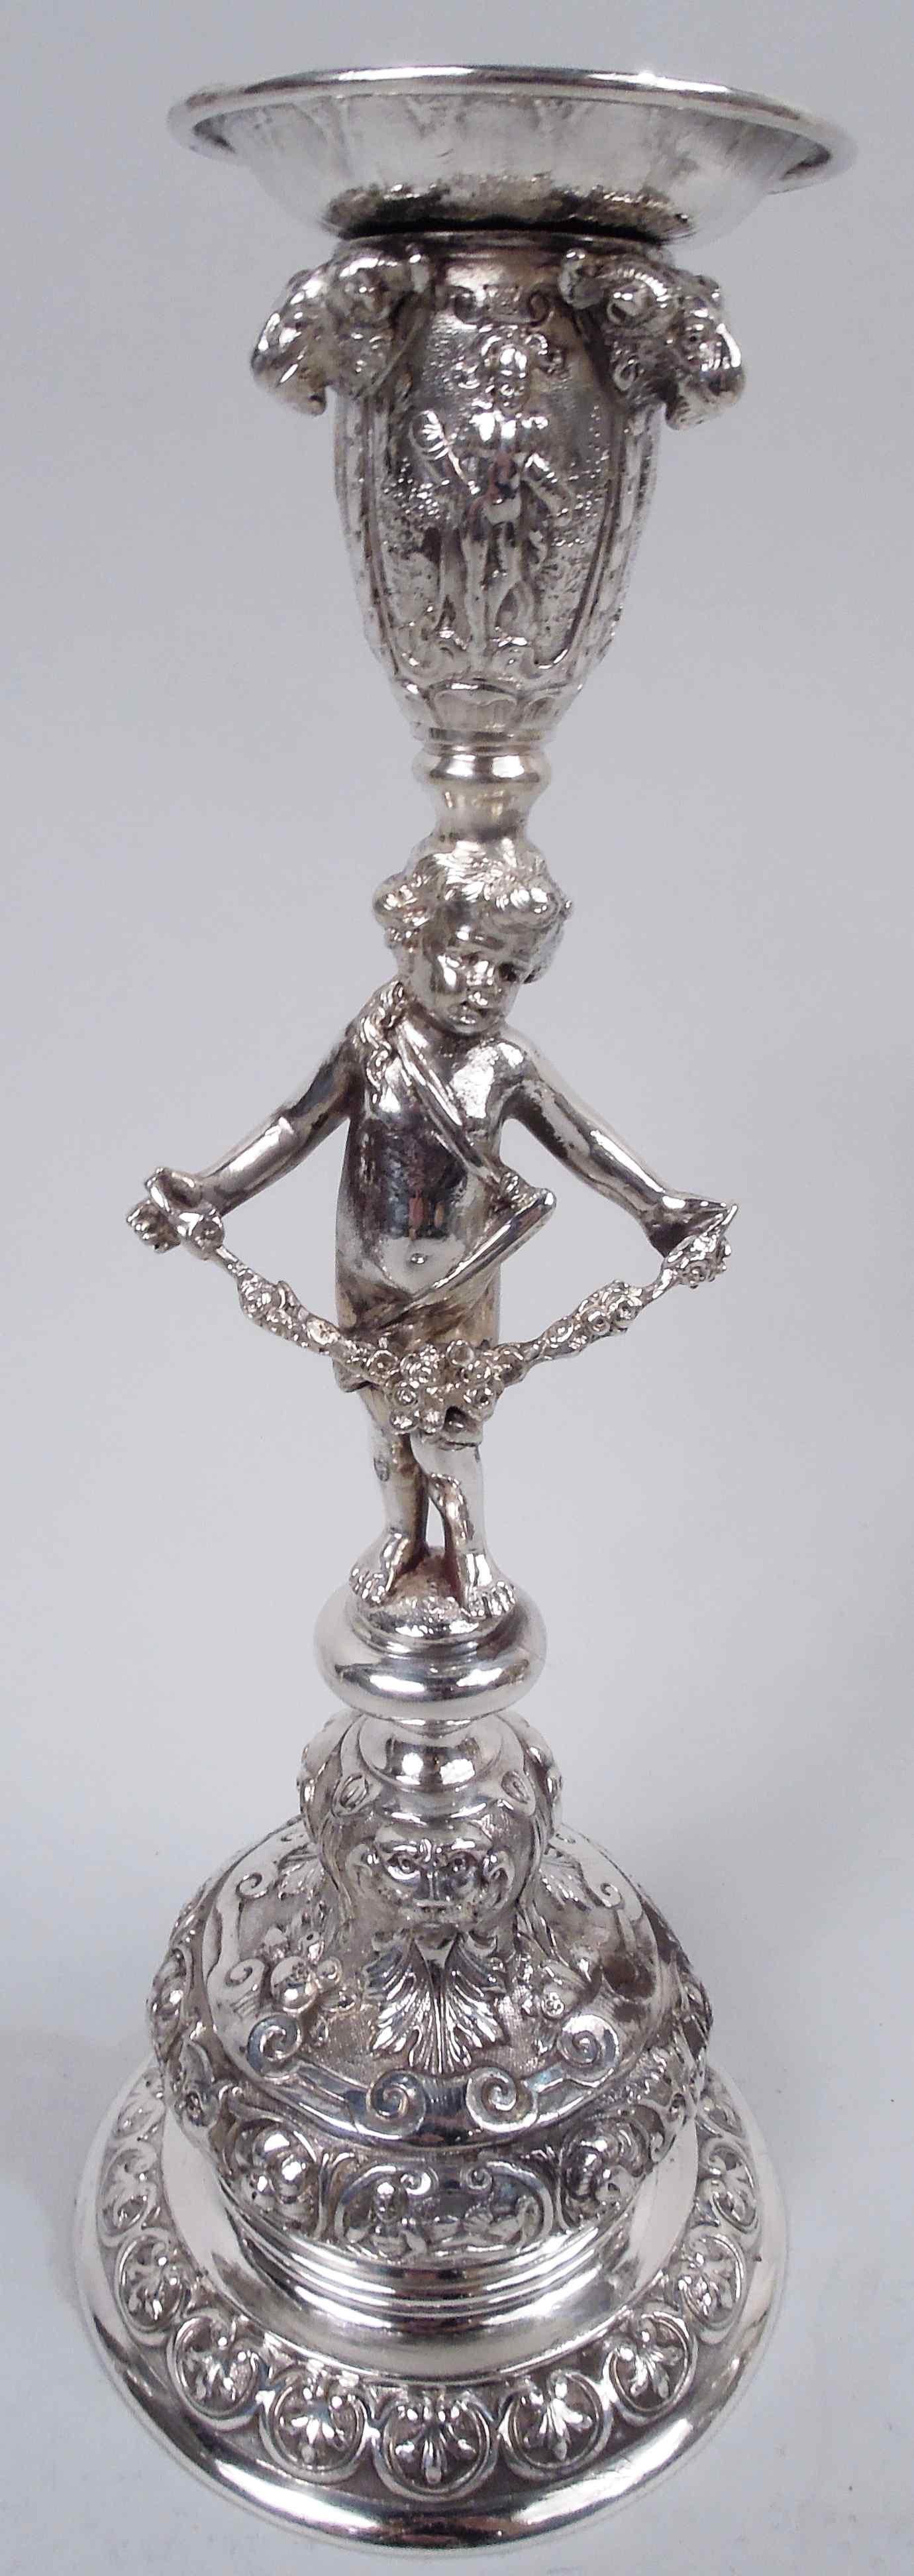 Set of 4 German Rococo Classical 800 silver candlesticks, ca 1900. Each: Cast figural shaft in form of adroitly-draped, bare-bottomed cherub standing on chubby, stubby legs with arms outspread, holding a floral garland. Ovoid socket with detachable